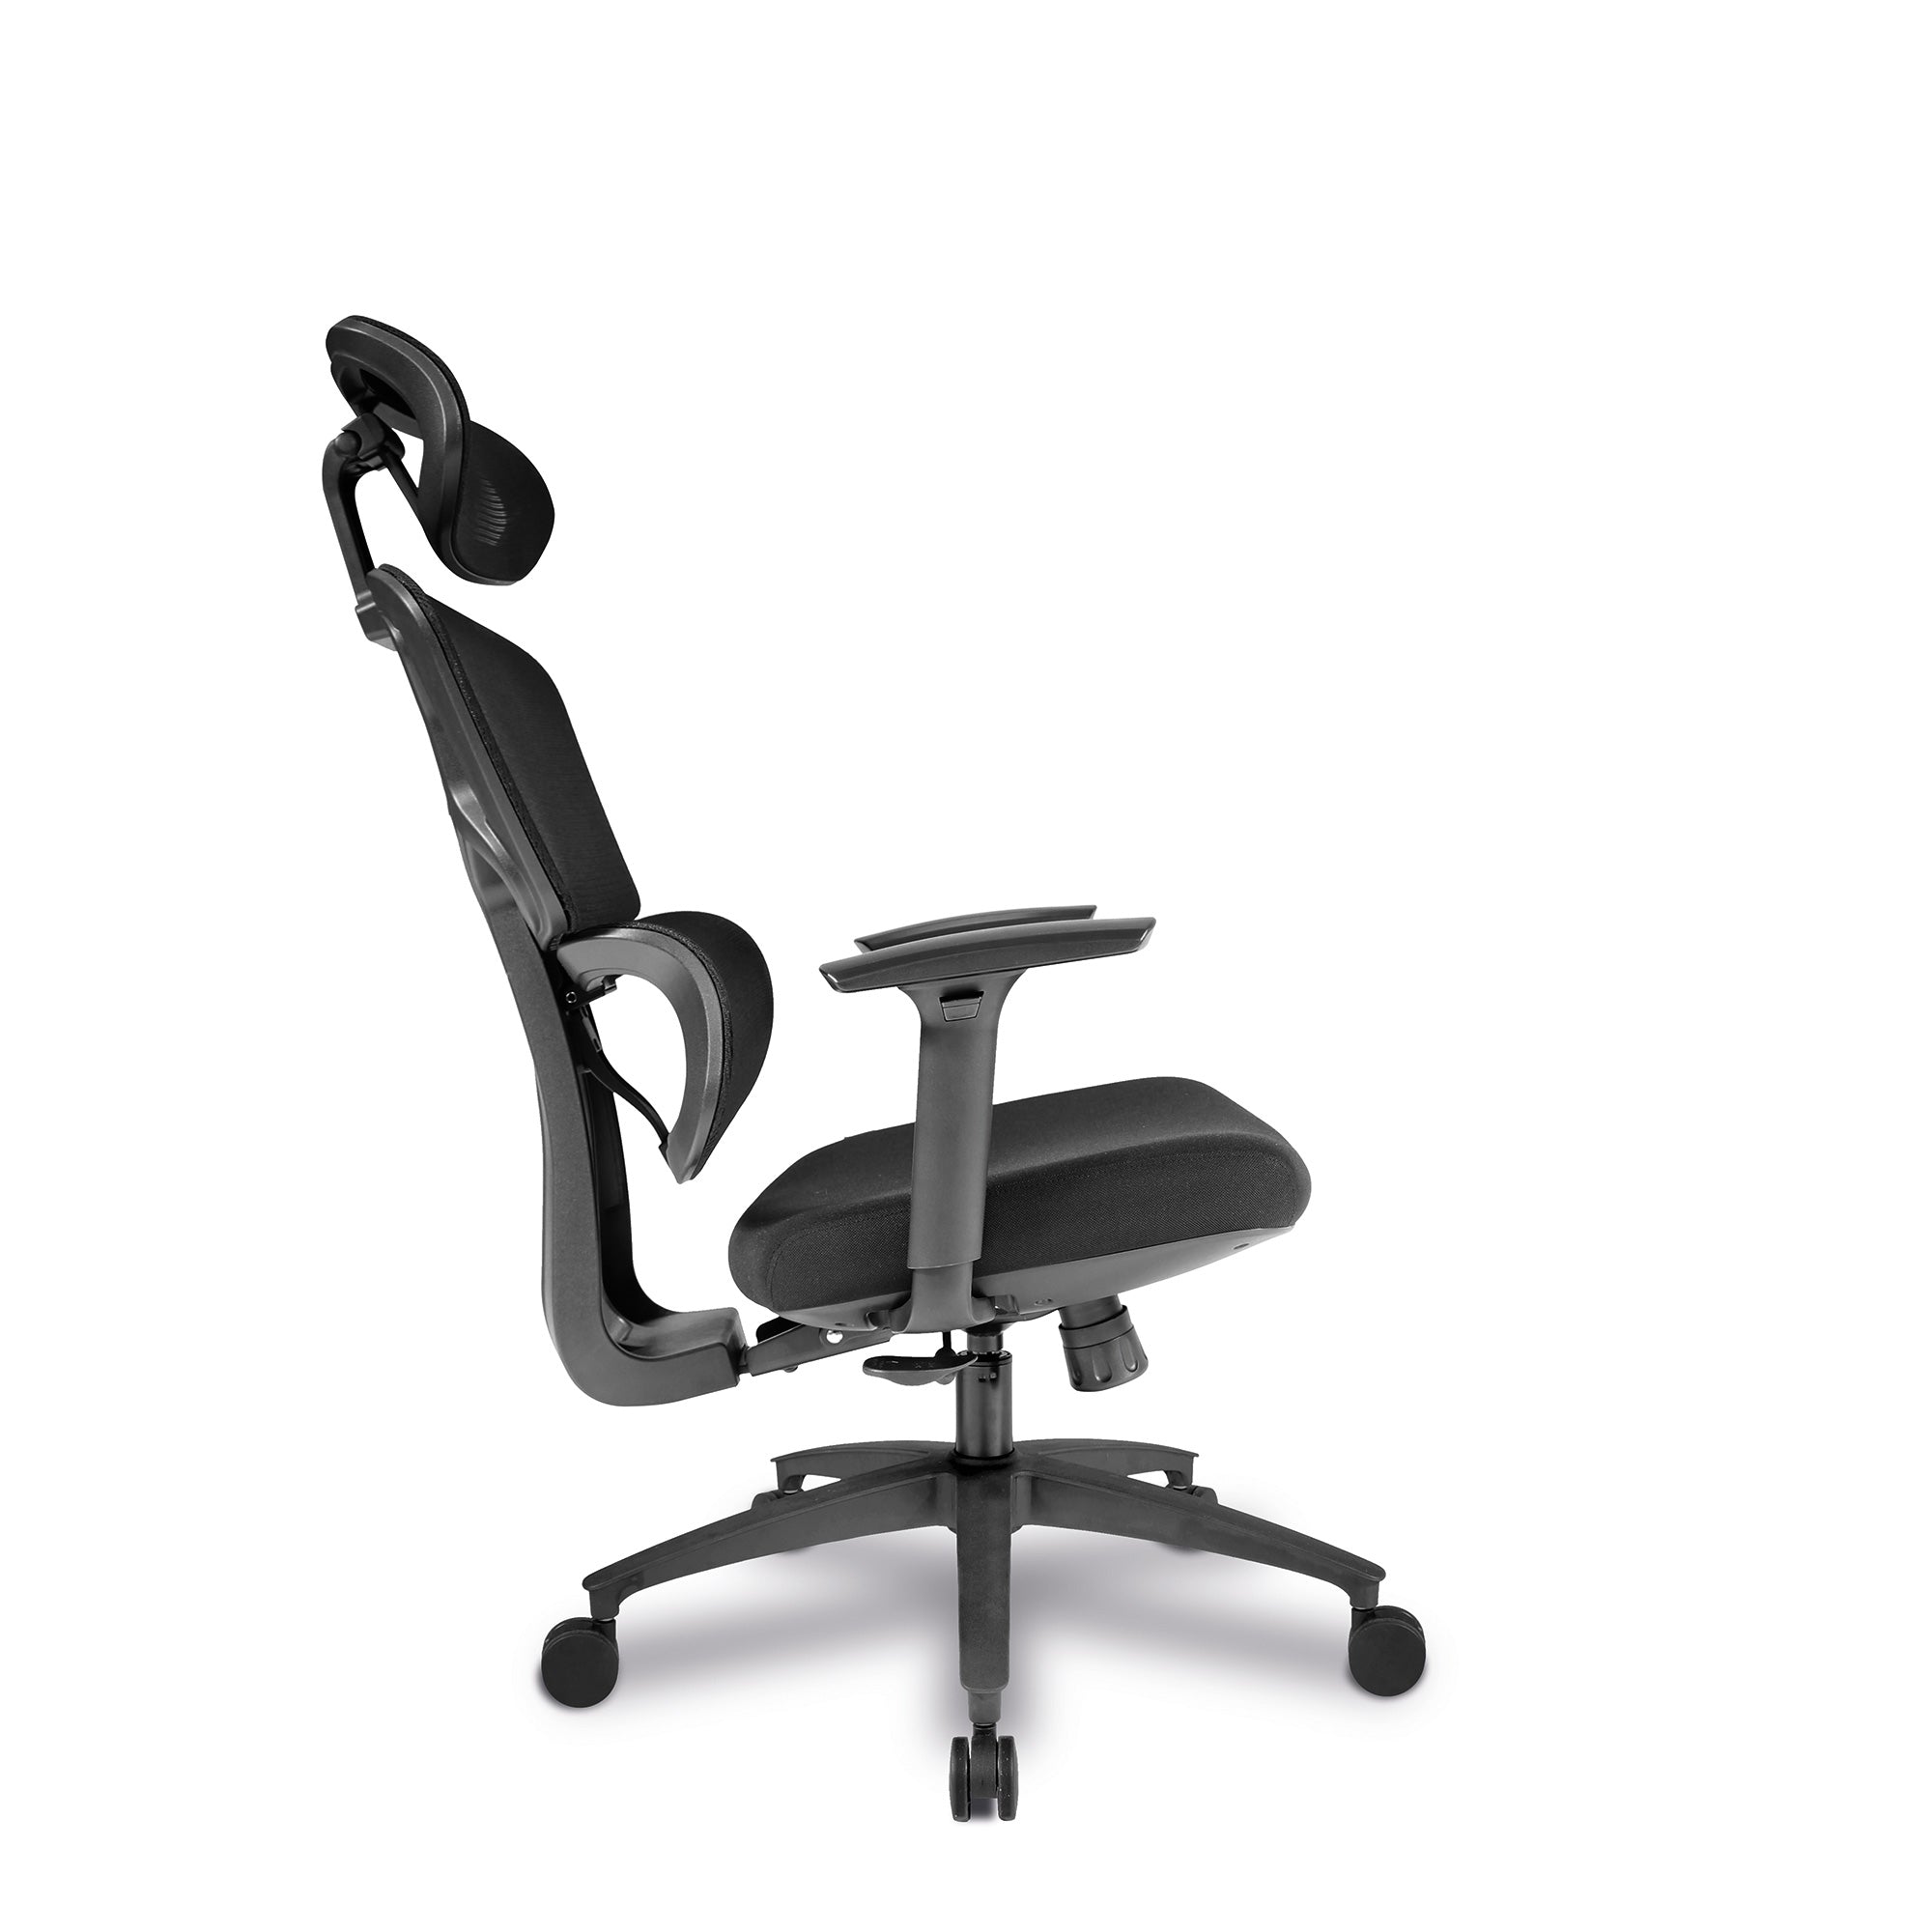 Trinity - Ergonomic High Back Mesh Chair with Multi Adjustable Headrest, Lumbar Support and Height Adjustable Arms